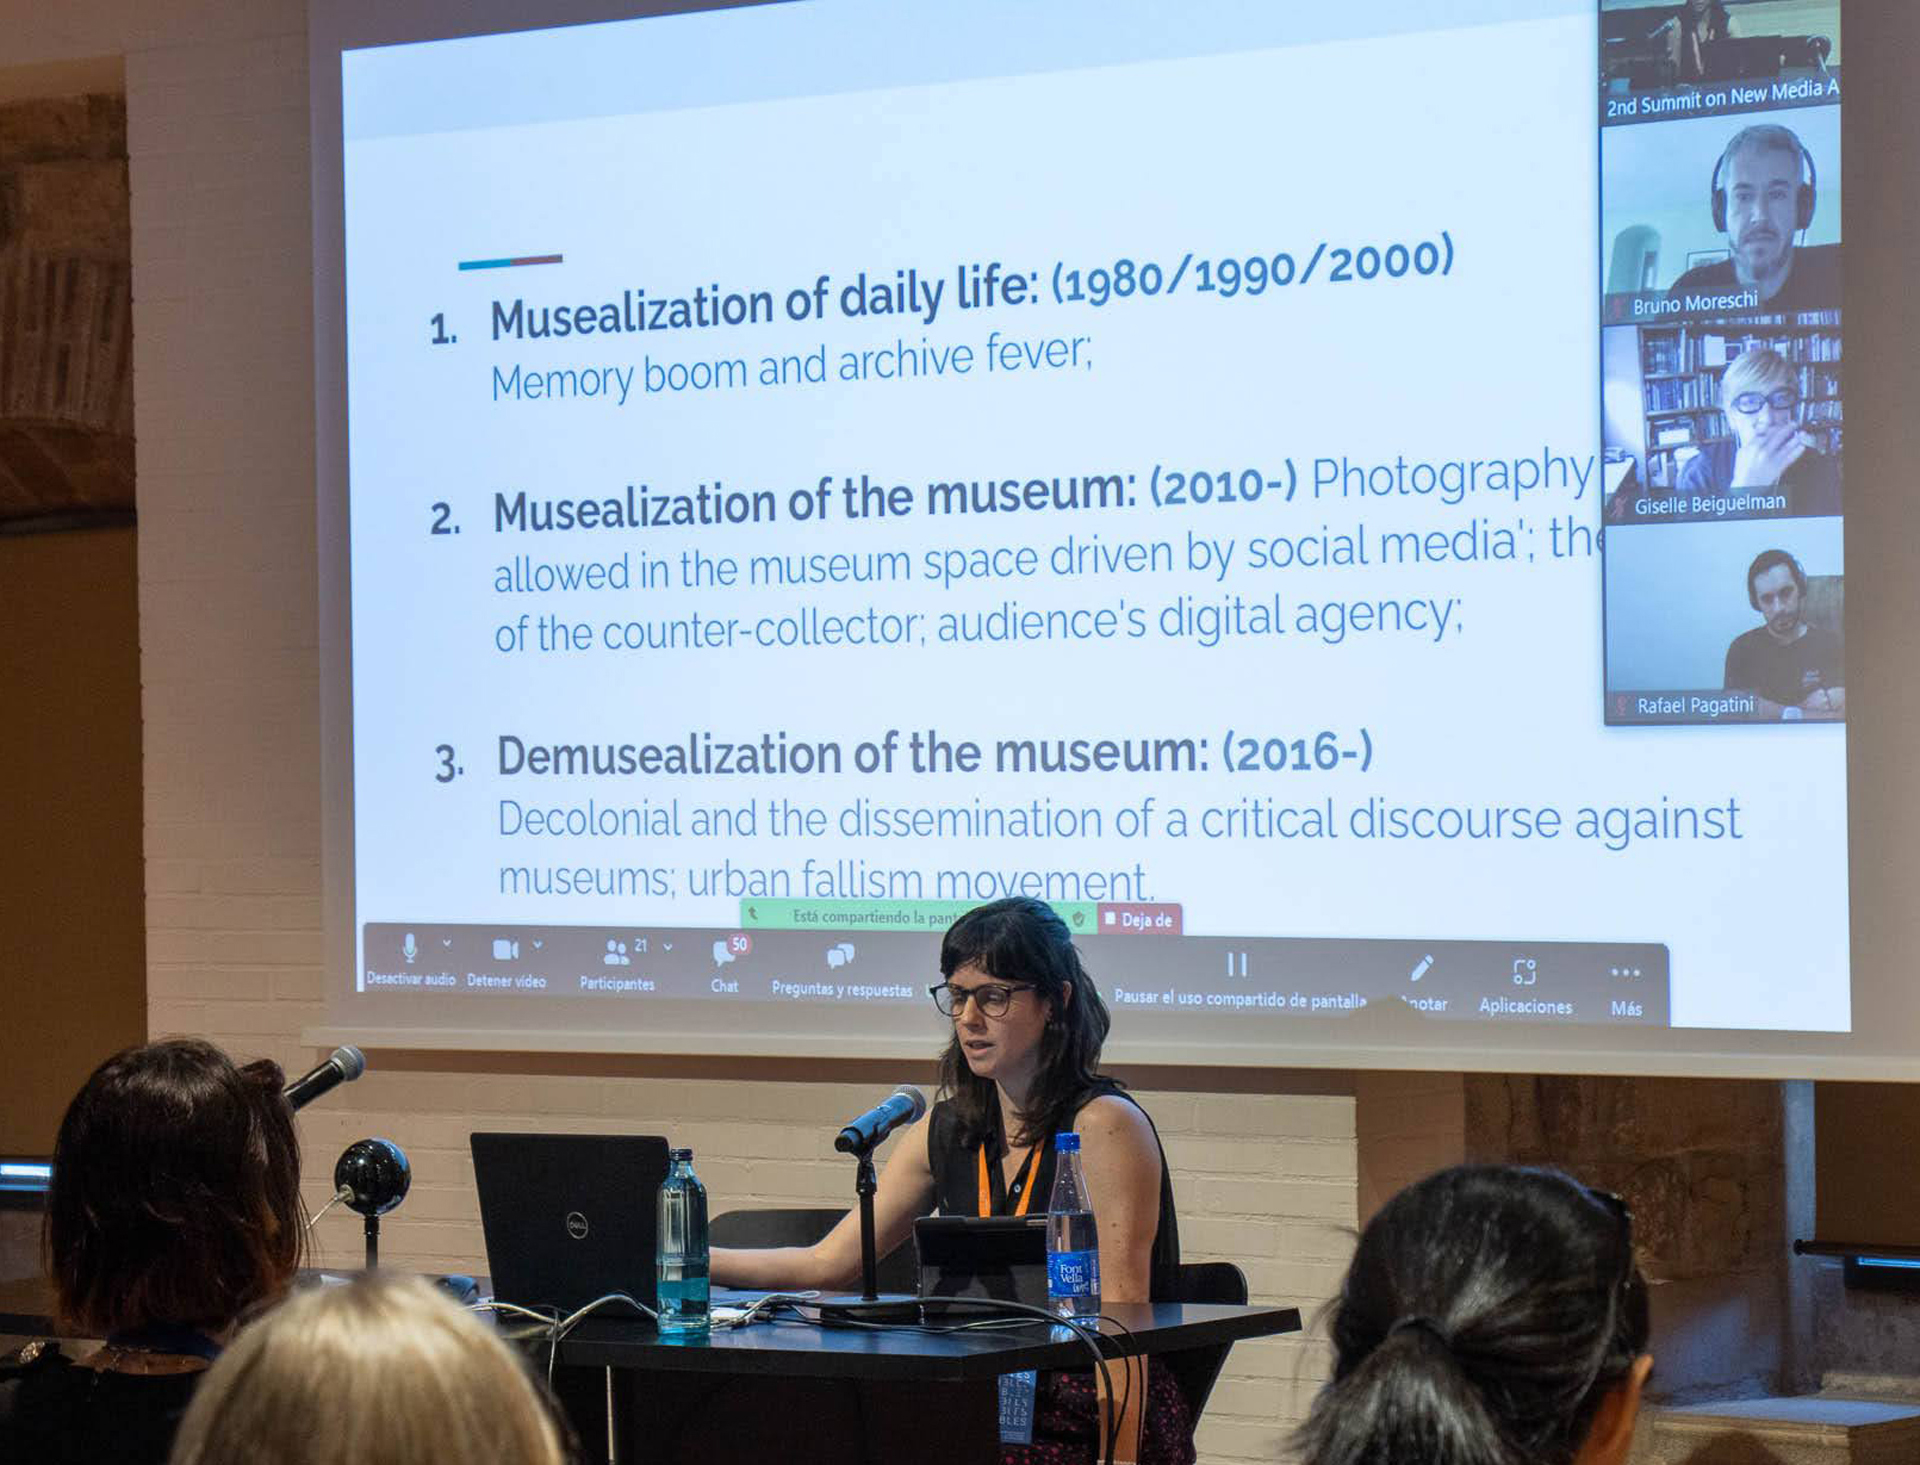 ©ISEA2022: 27th International Symposium on Electronic Art, Nathalia Lavigne, Giselle Beiguelman, Bruno Moreschi, and Rafael Pagatini, Demusealizing the Museum: Audience’s Digital Agency and Institutional Critique 2.0 as Possible Futures for Art Institutions